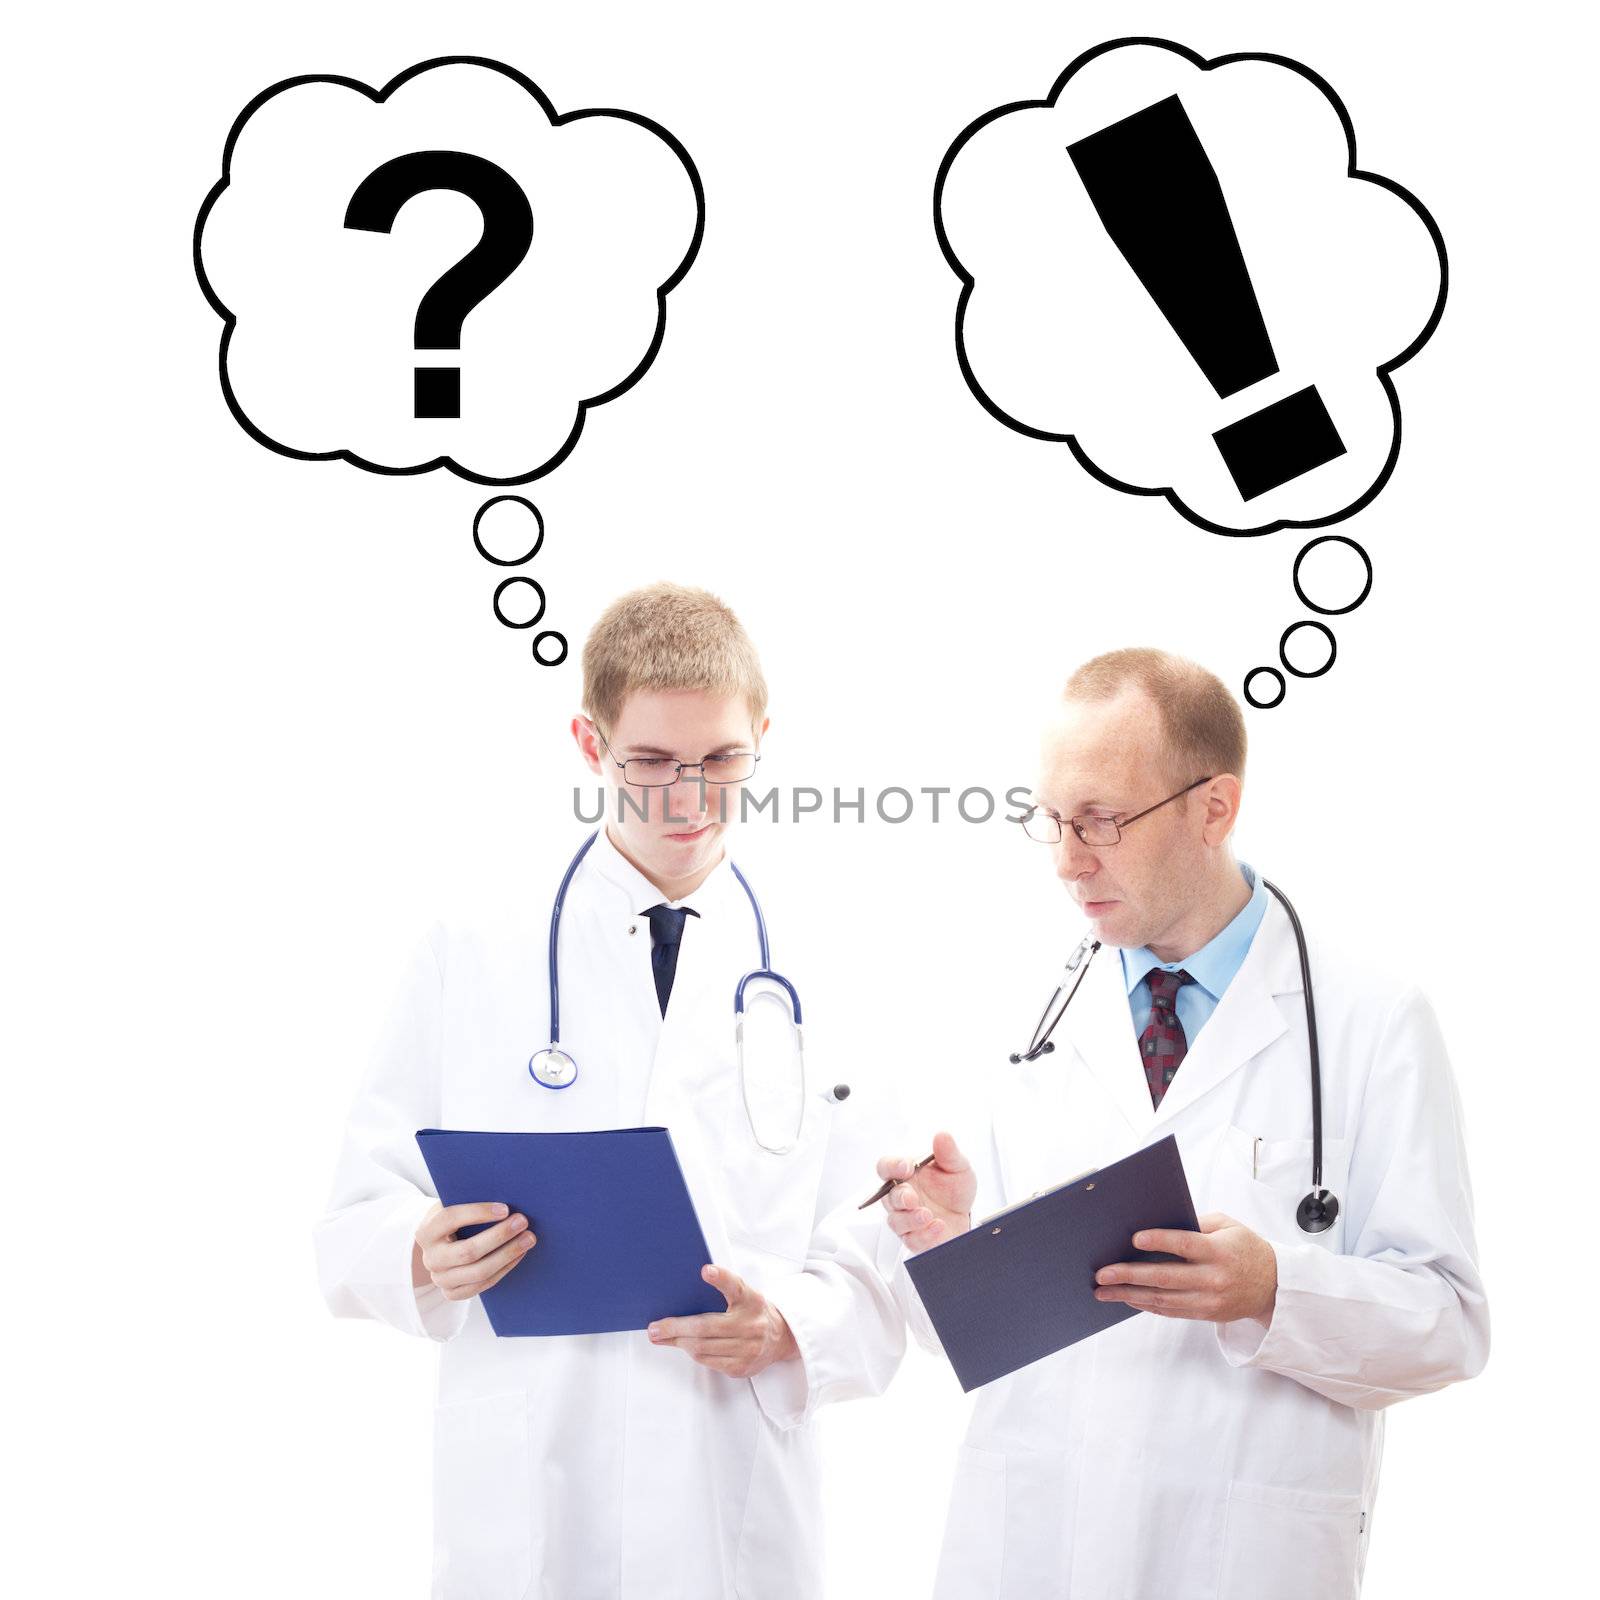 Young physician does not understand the doctor